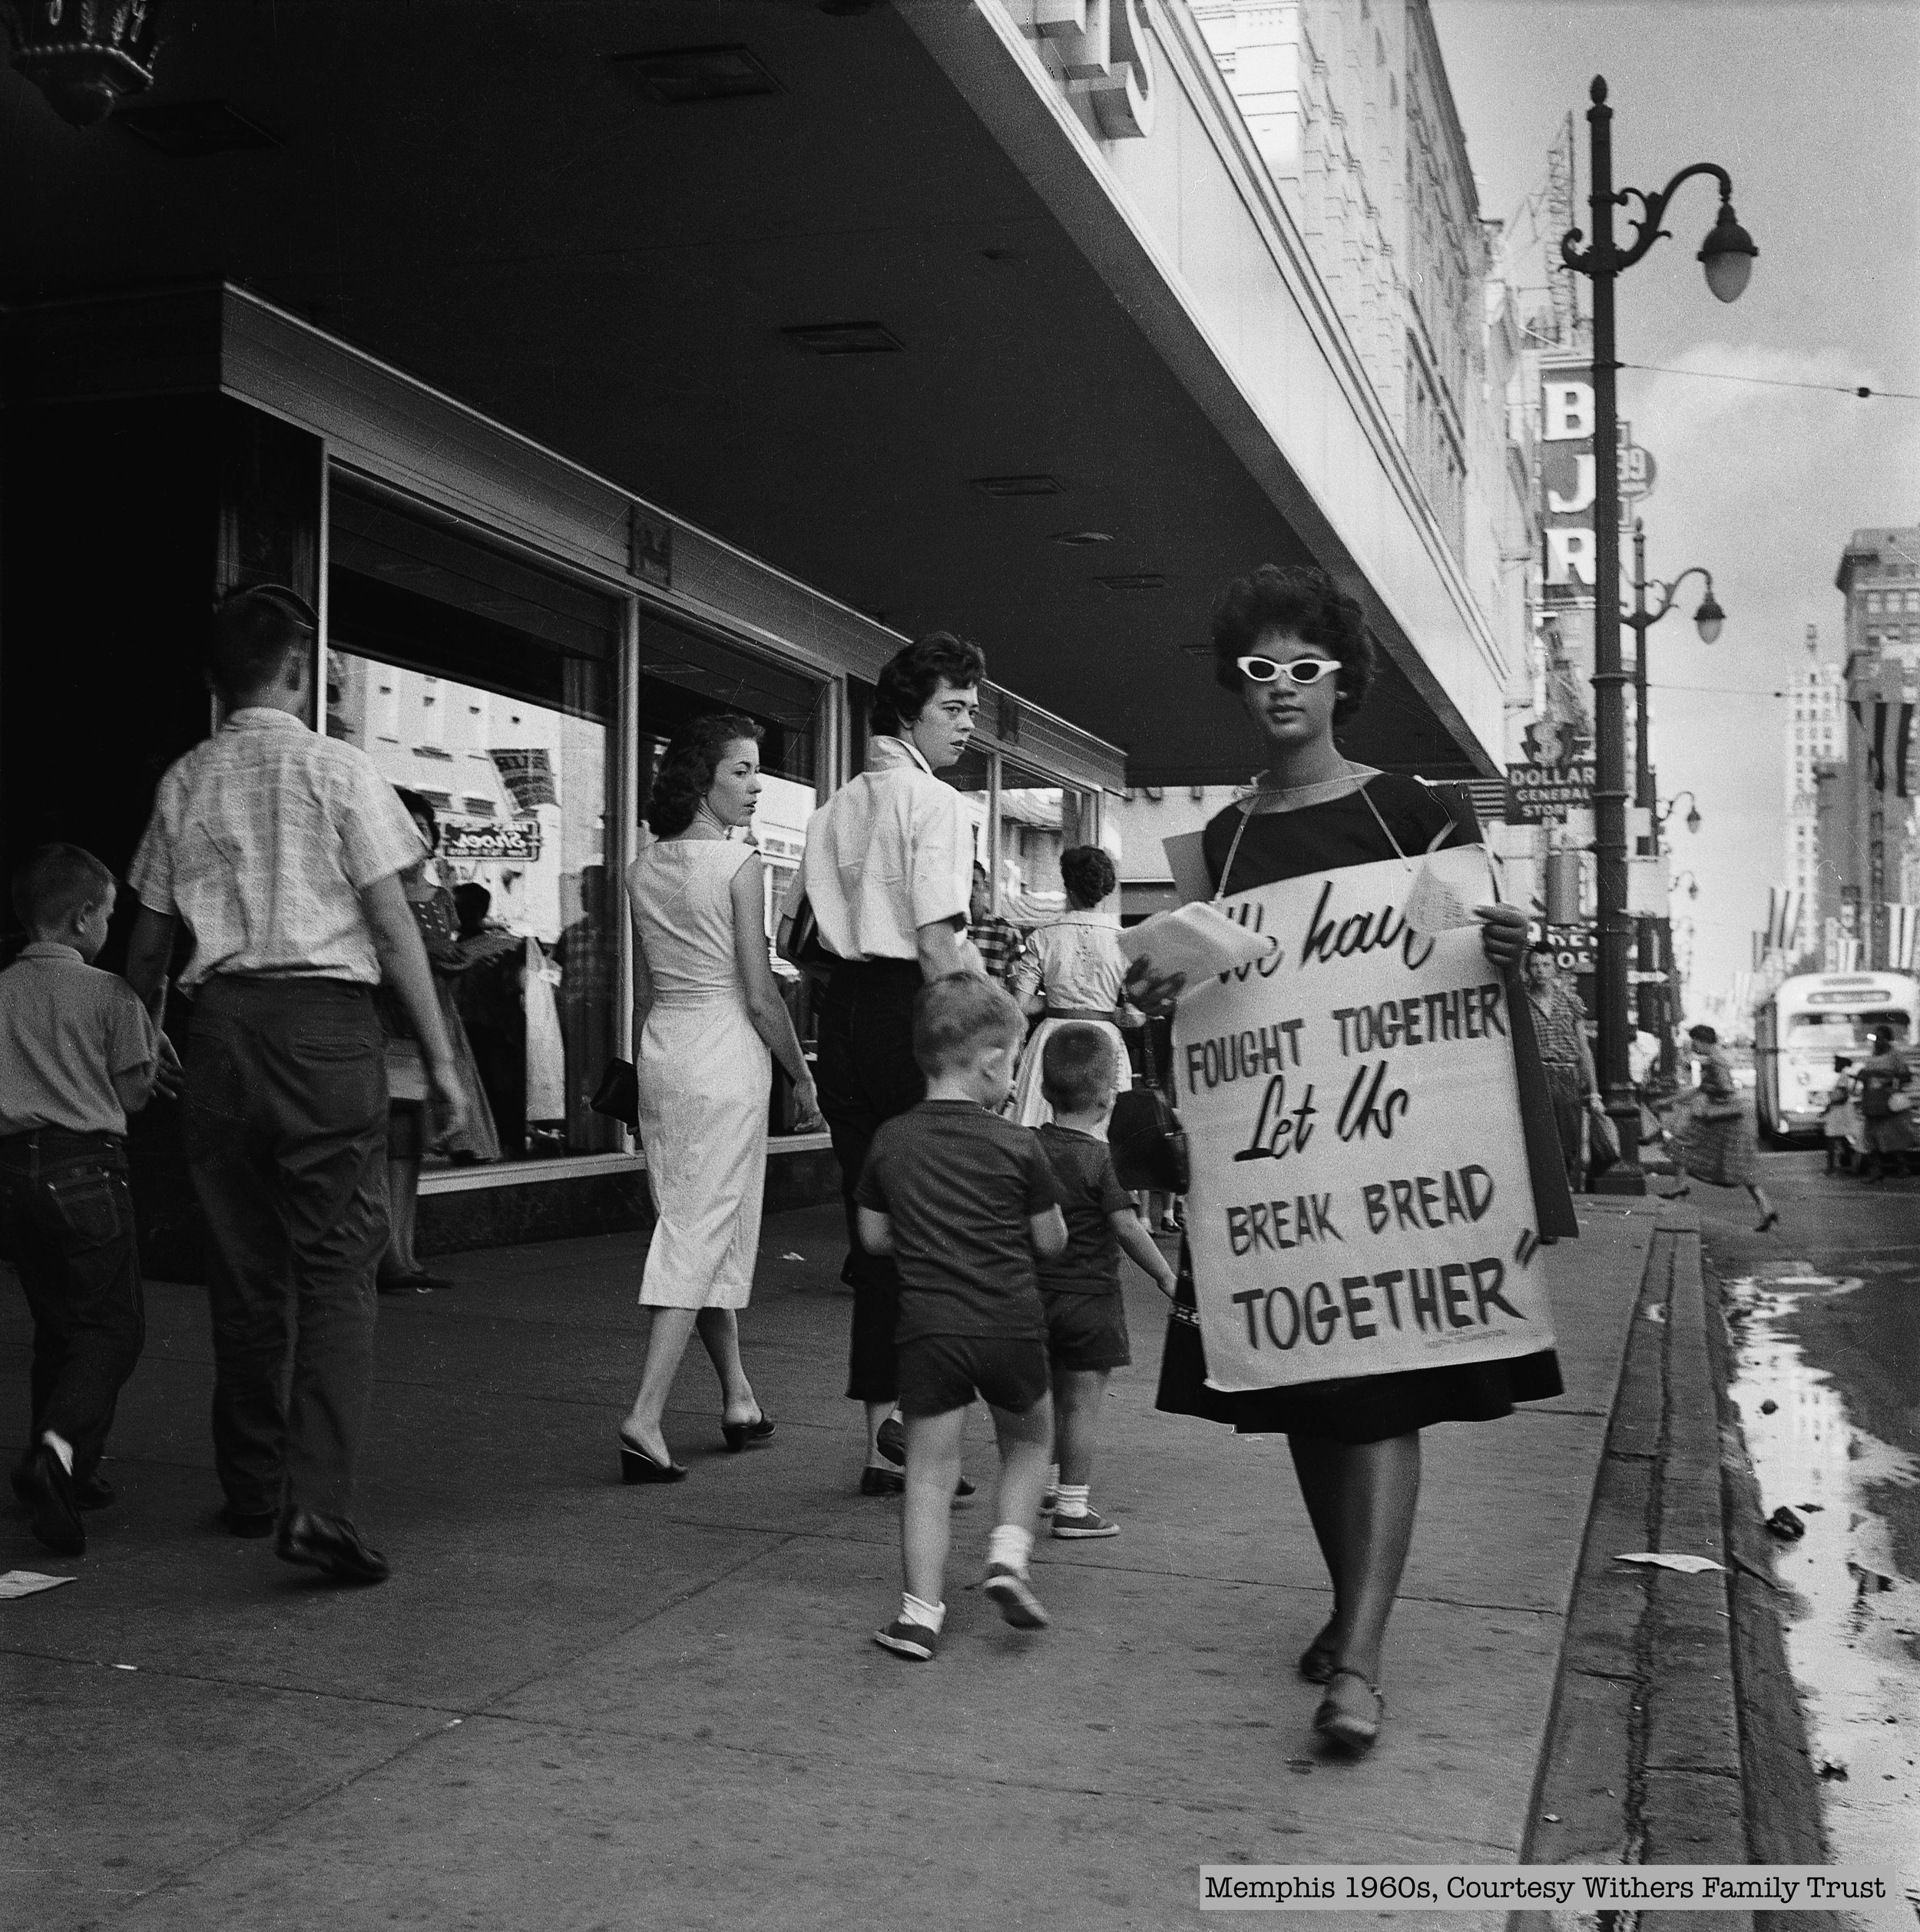 NAACP protester 1960s Memphis c. Withers Family Trust.jpg